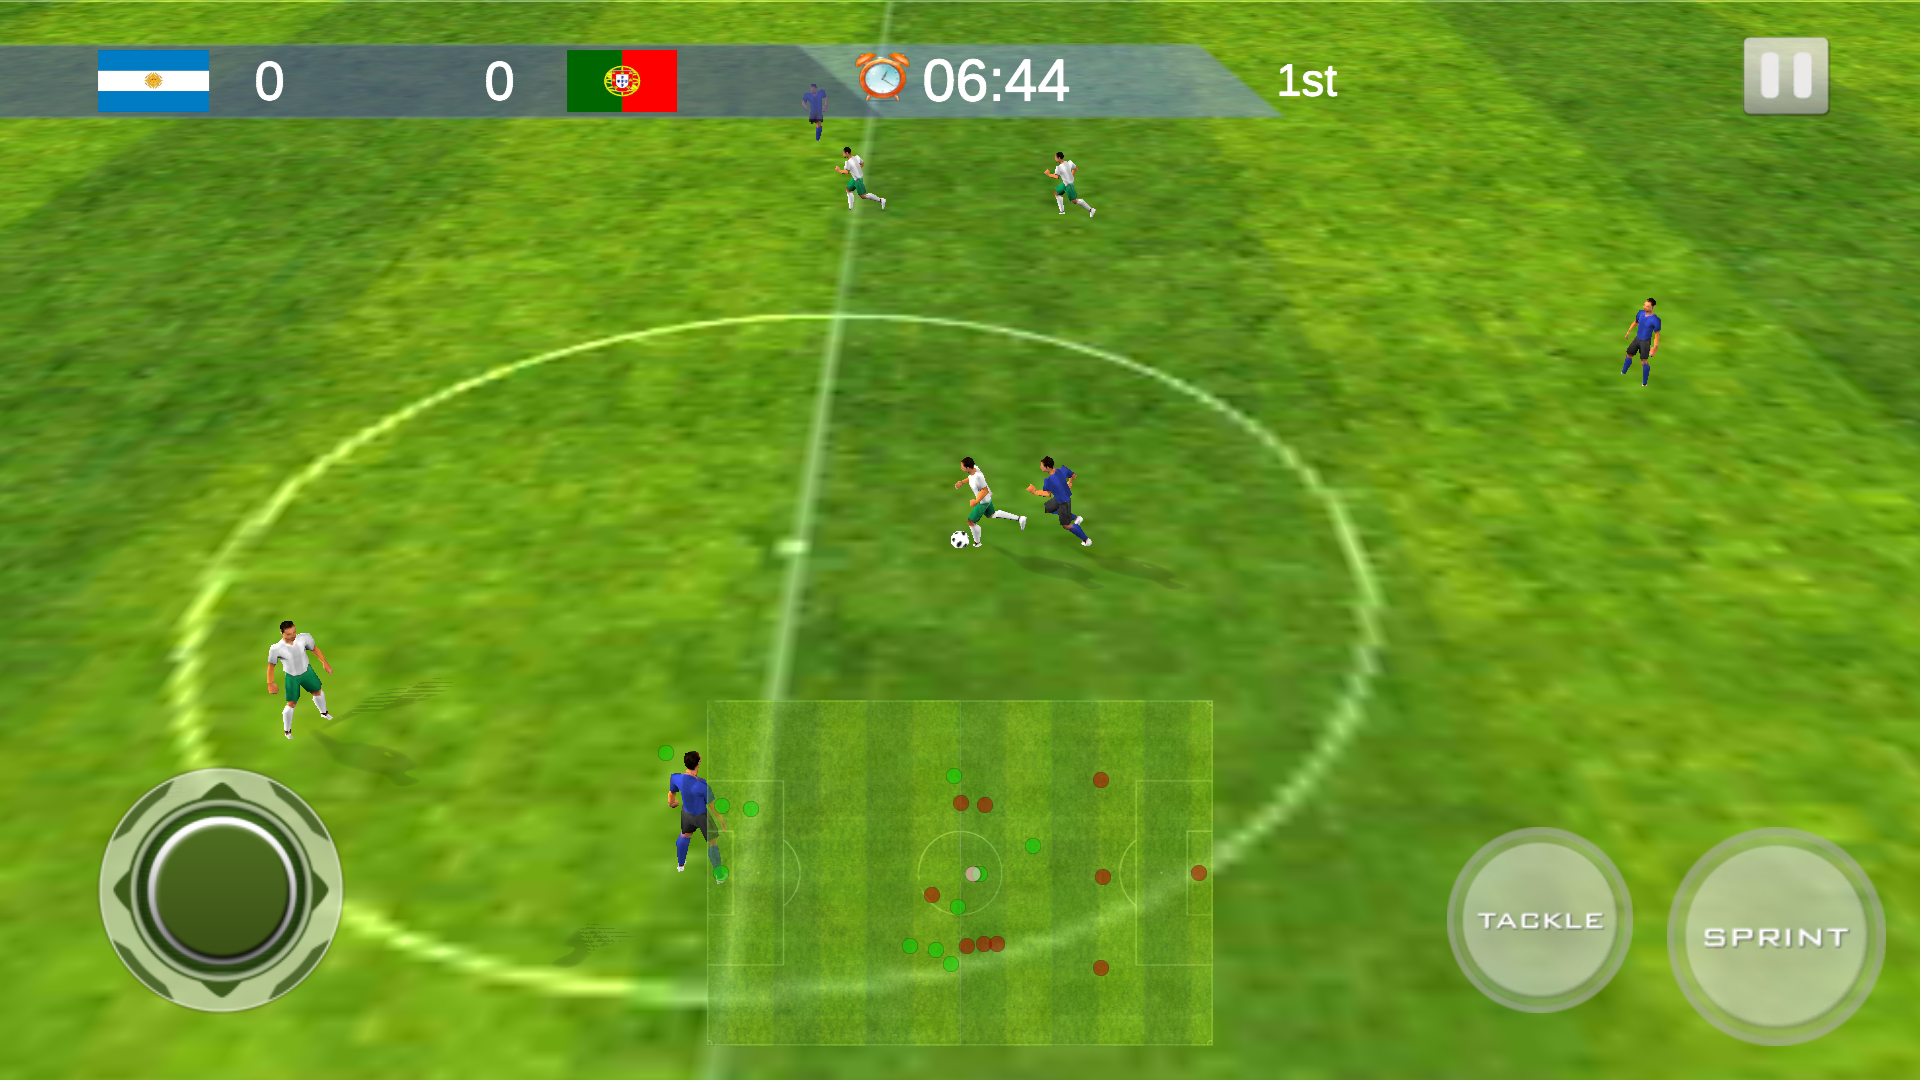 Download Soccer Game-3D with AdMob by cooldevelopers01 | CodeCanyon